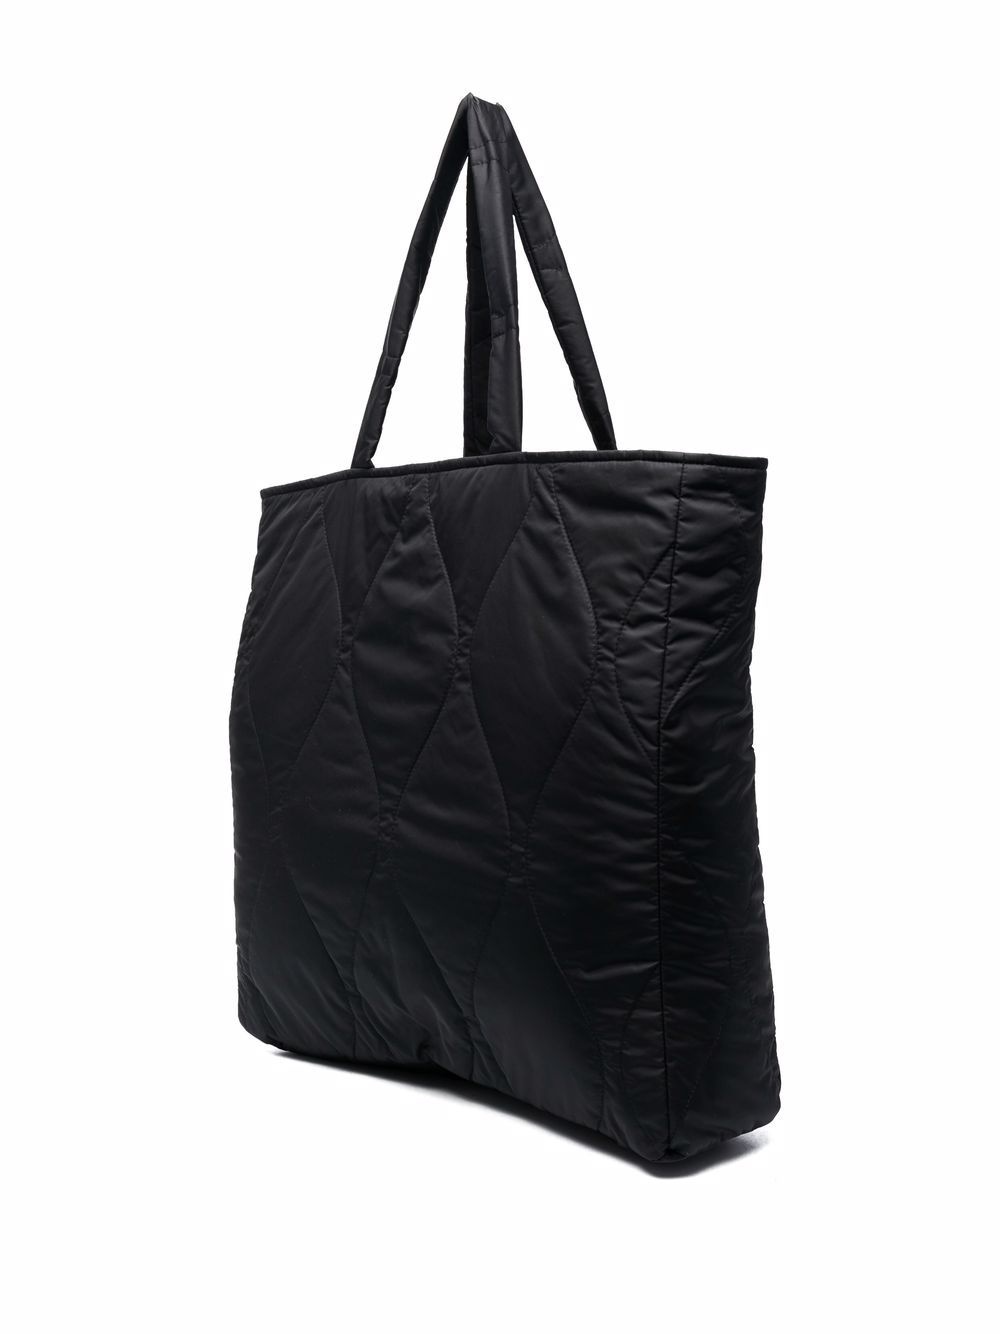 LEXIS quilted tote bag - 3